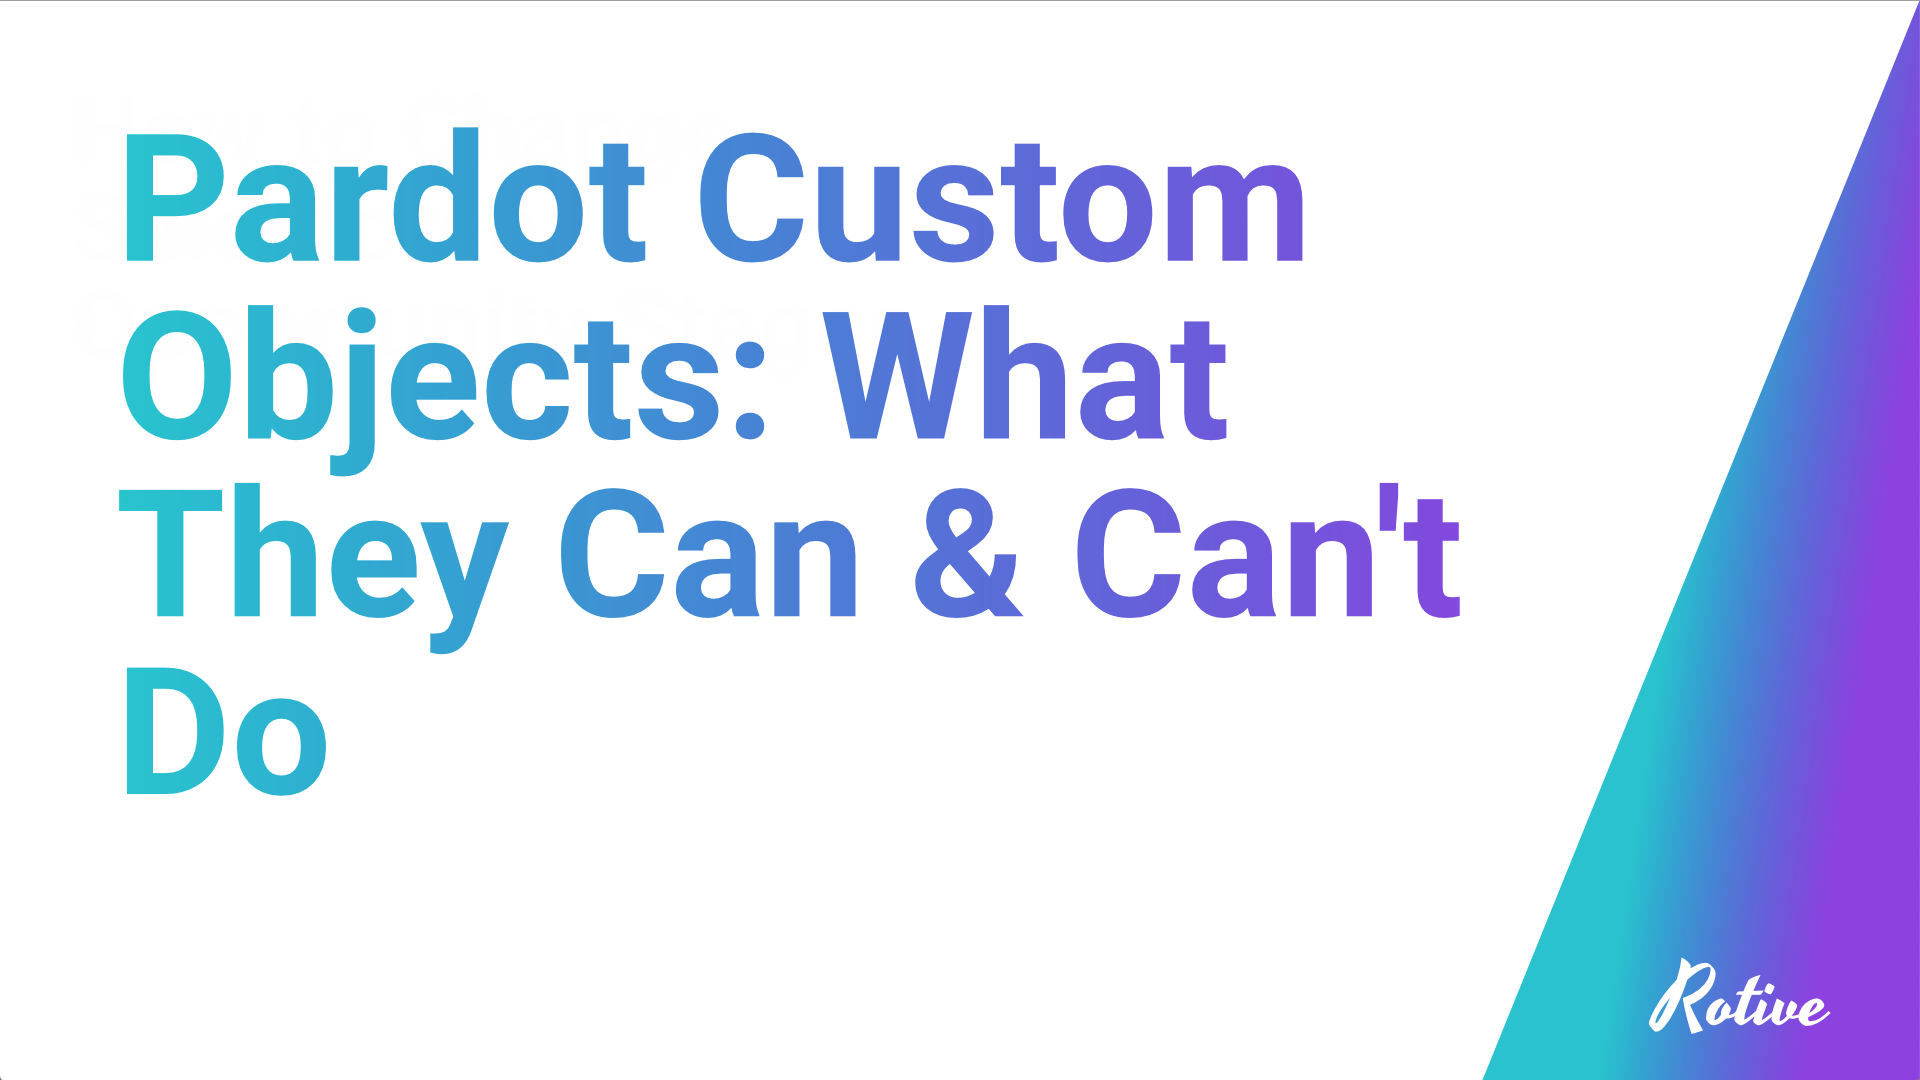 Pardot Custom Objects: What They Can & Can't Do